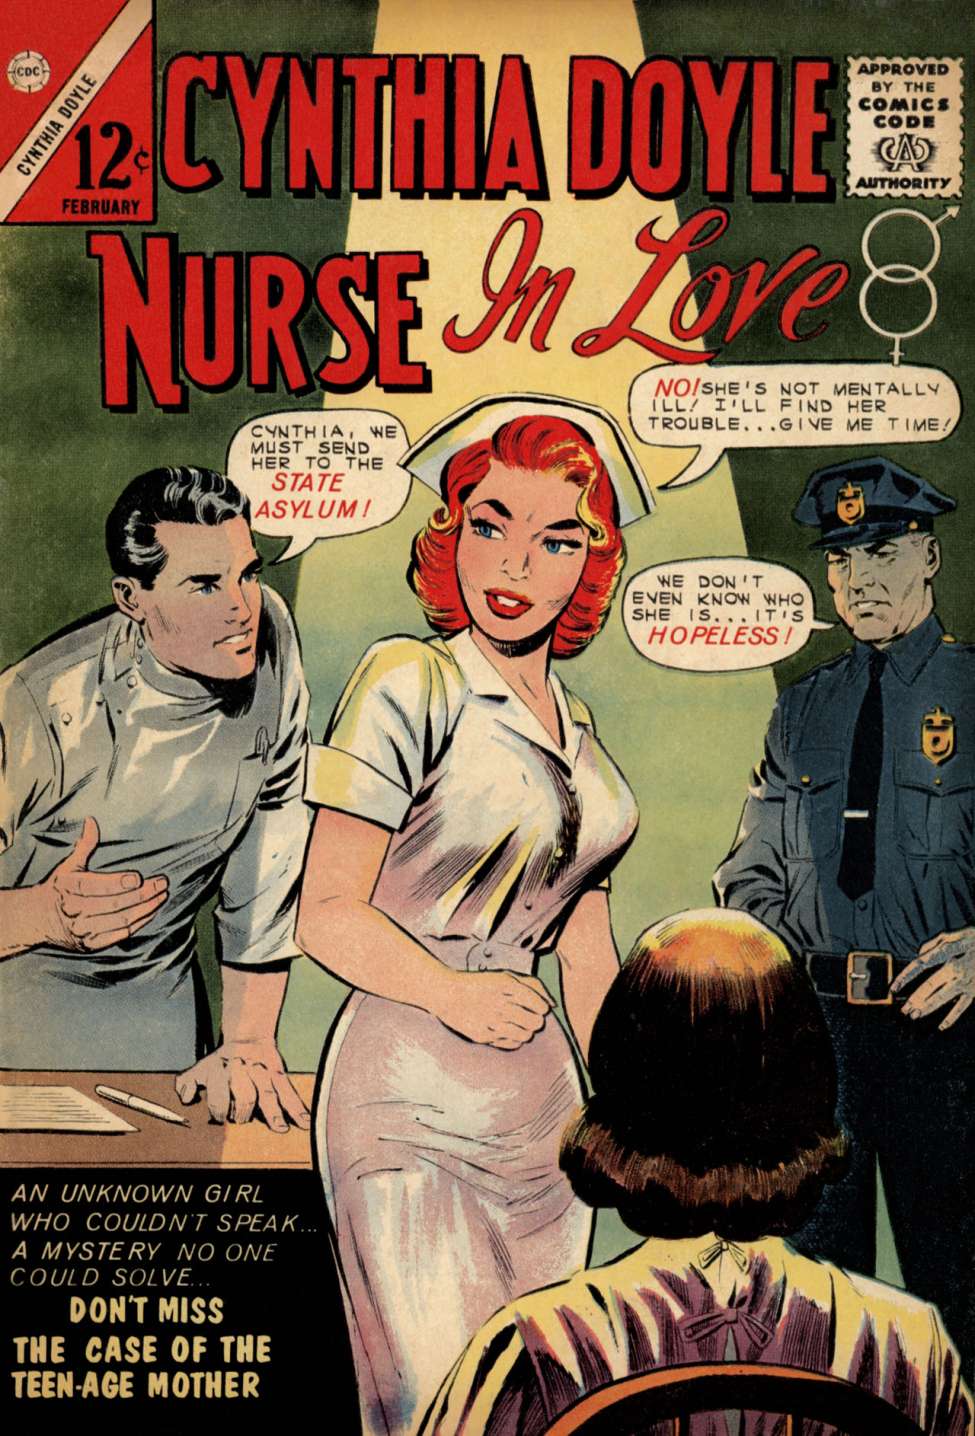 Book Cover For Cynthia Doyle, Nurse in Love 68